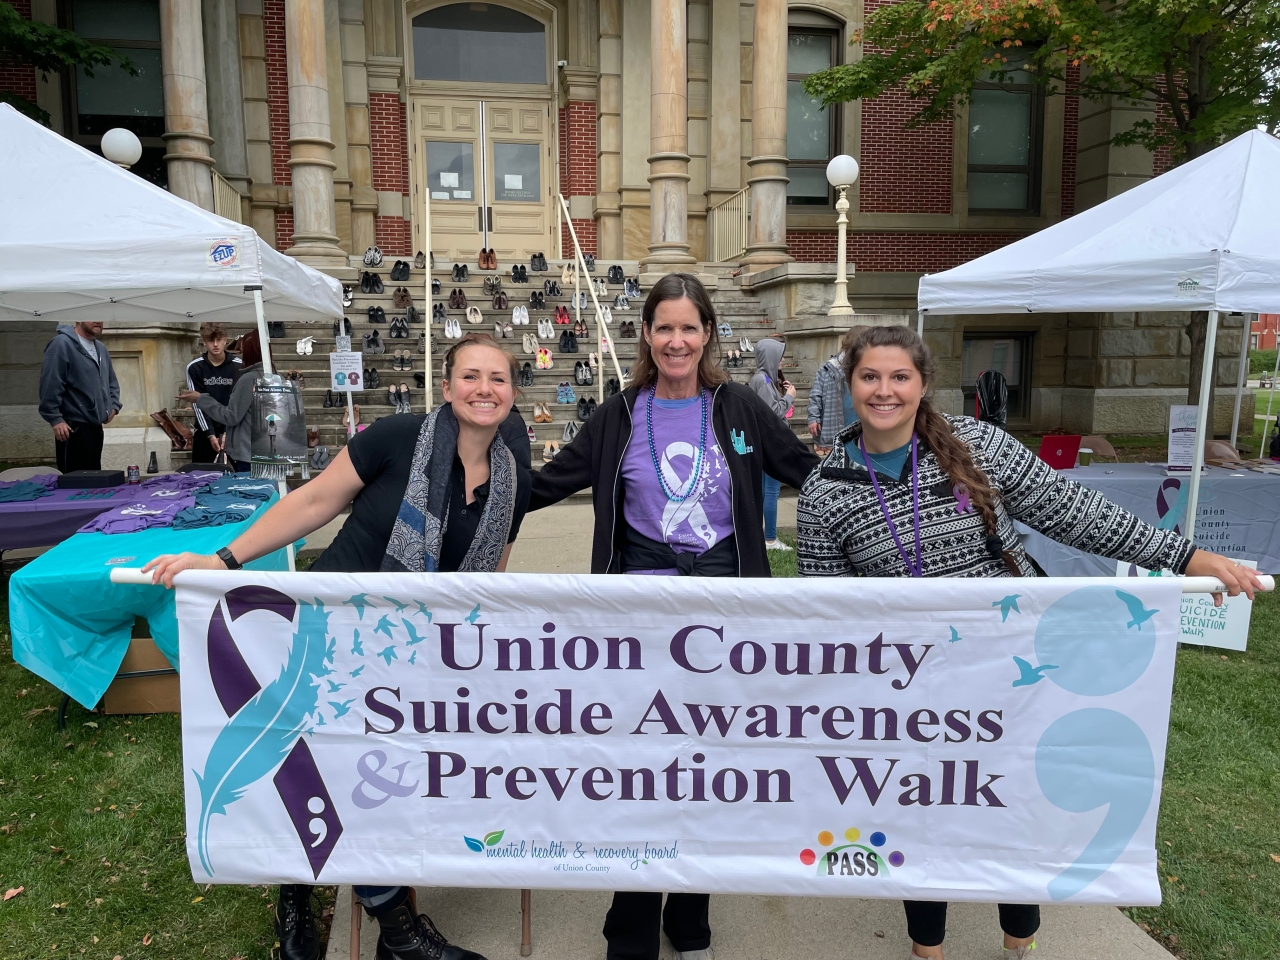 Representative Richardson attended the Union County Suicide Awareness/Prevention Walk to show support for an end to suicide. Too many are dying and every person needs to know that they are cherished.